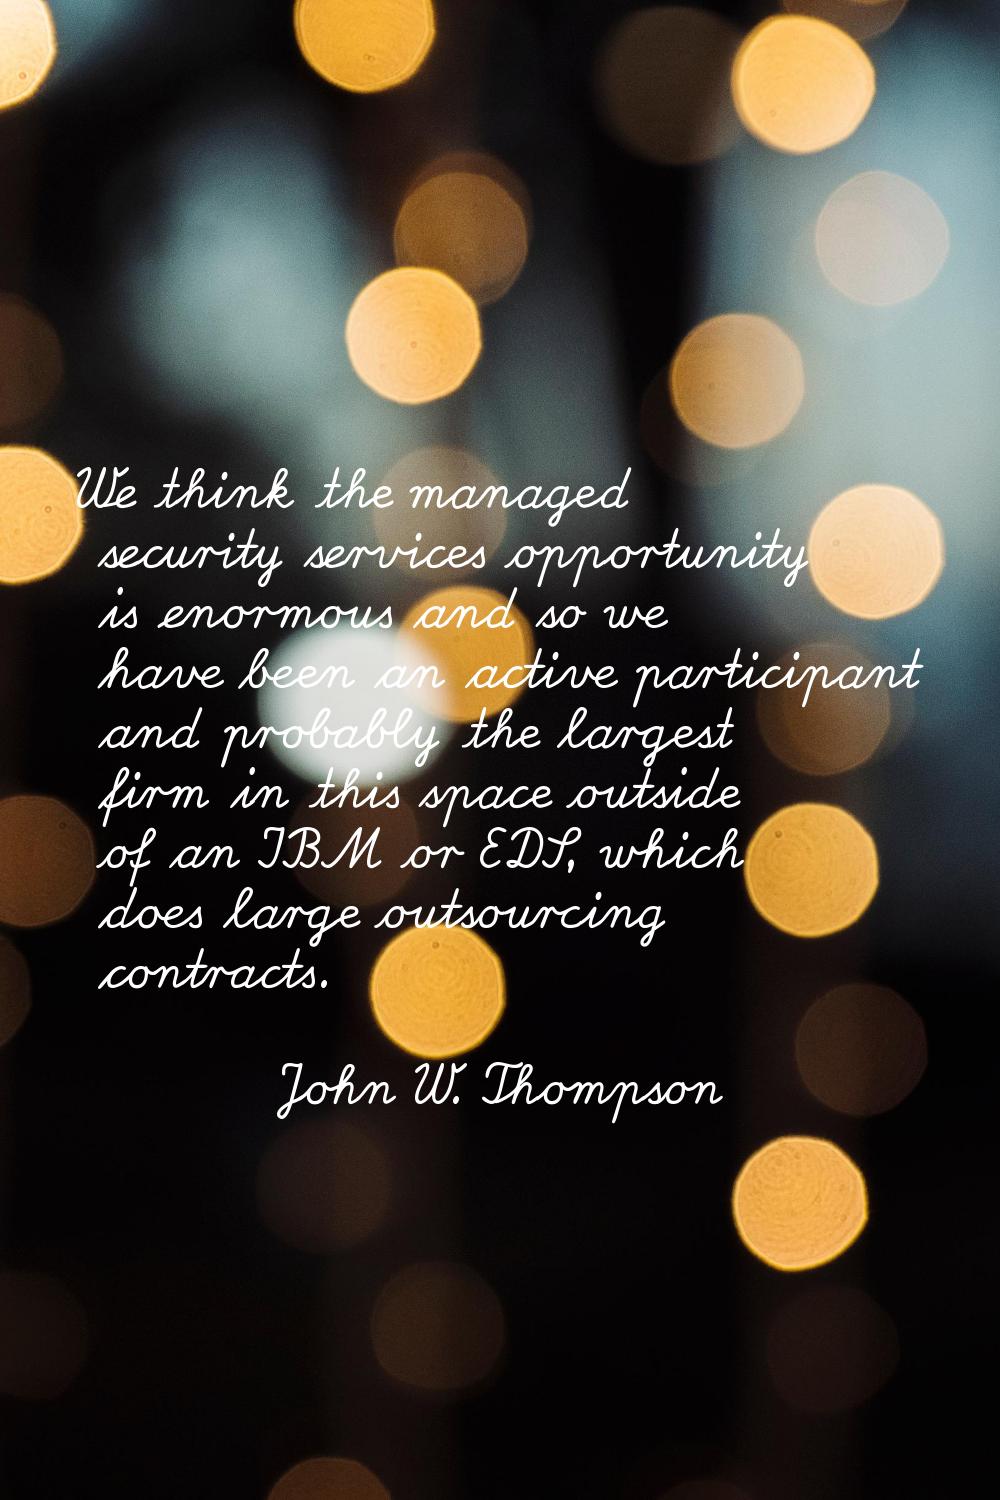 We think the managed security services opportunity is enormous and so we have been an active partic